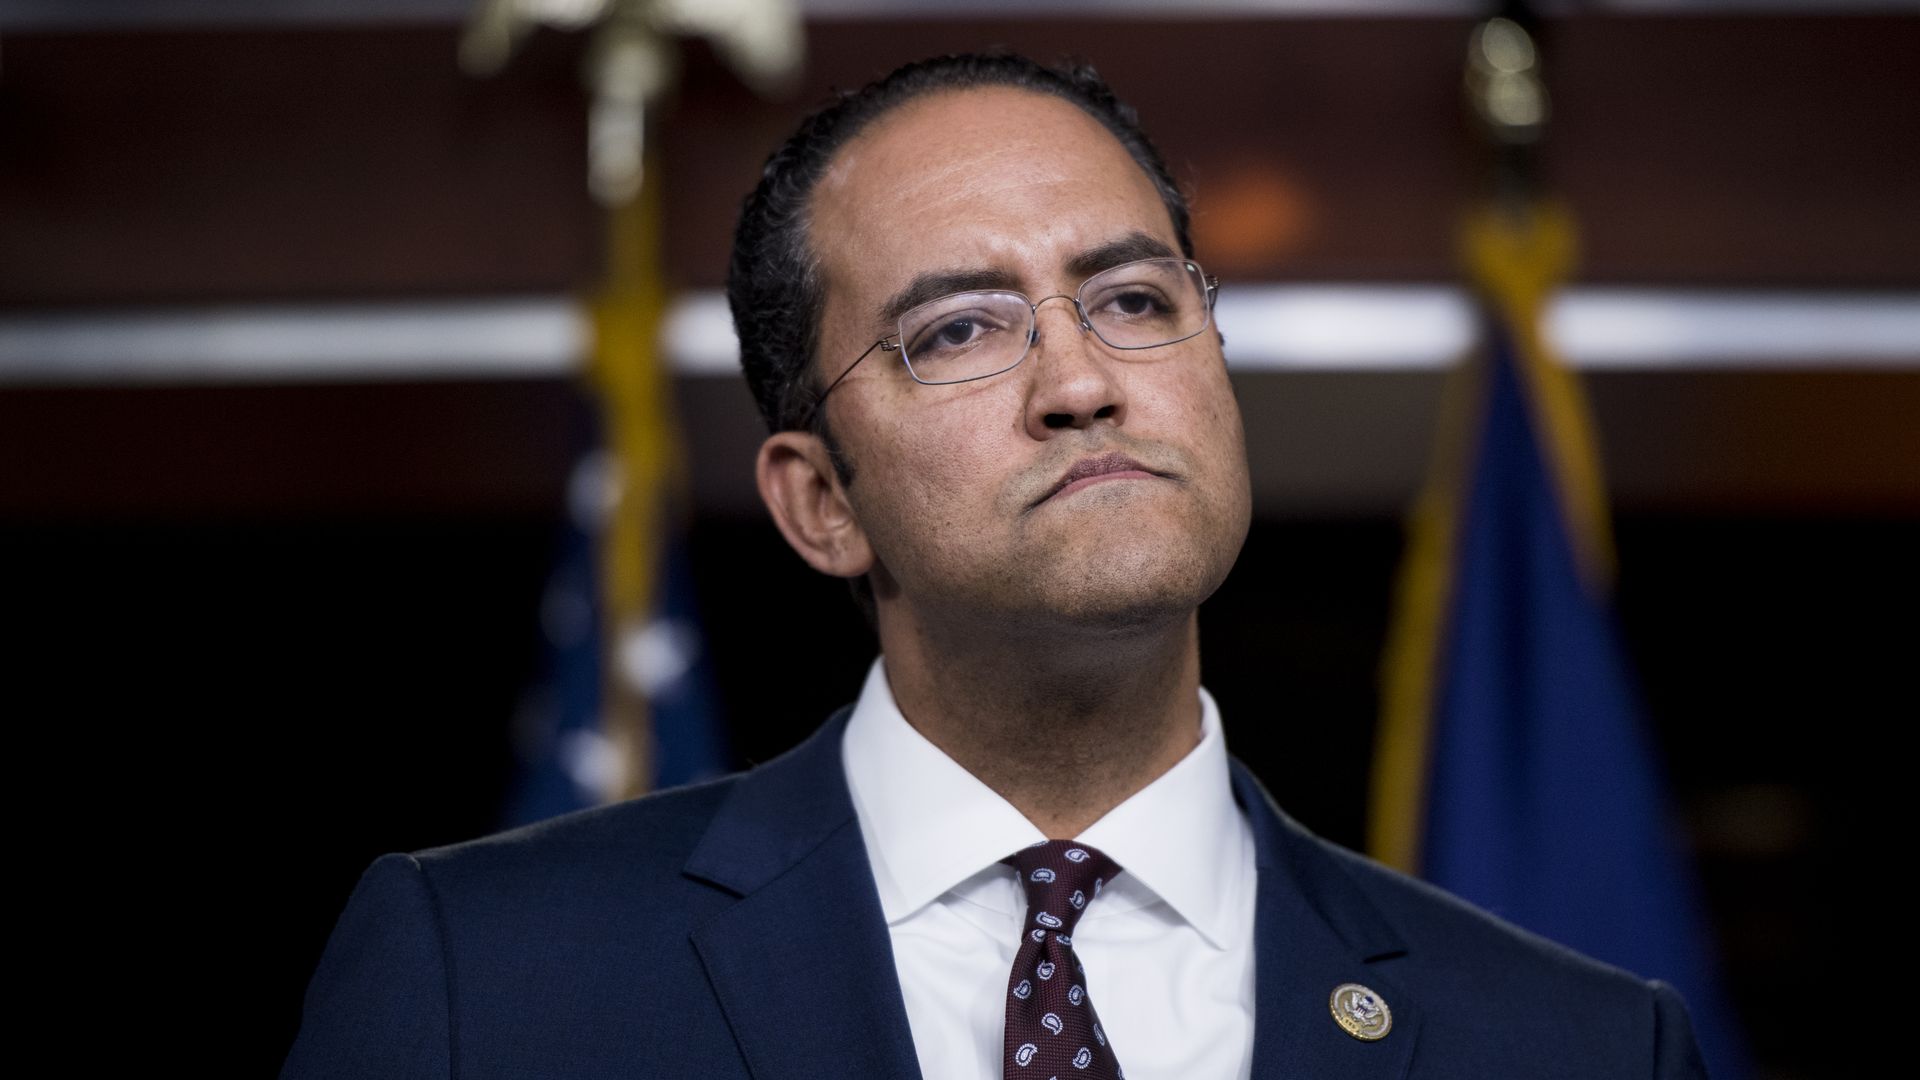 Rep. Will Hurd looking unhappy